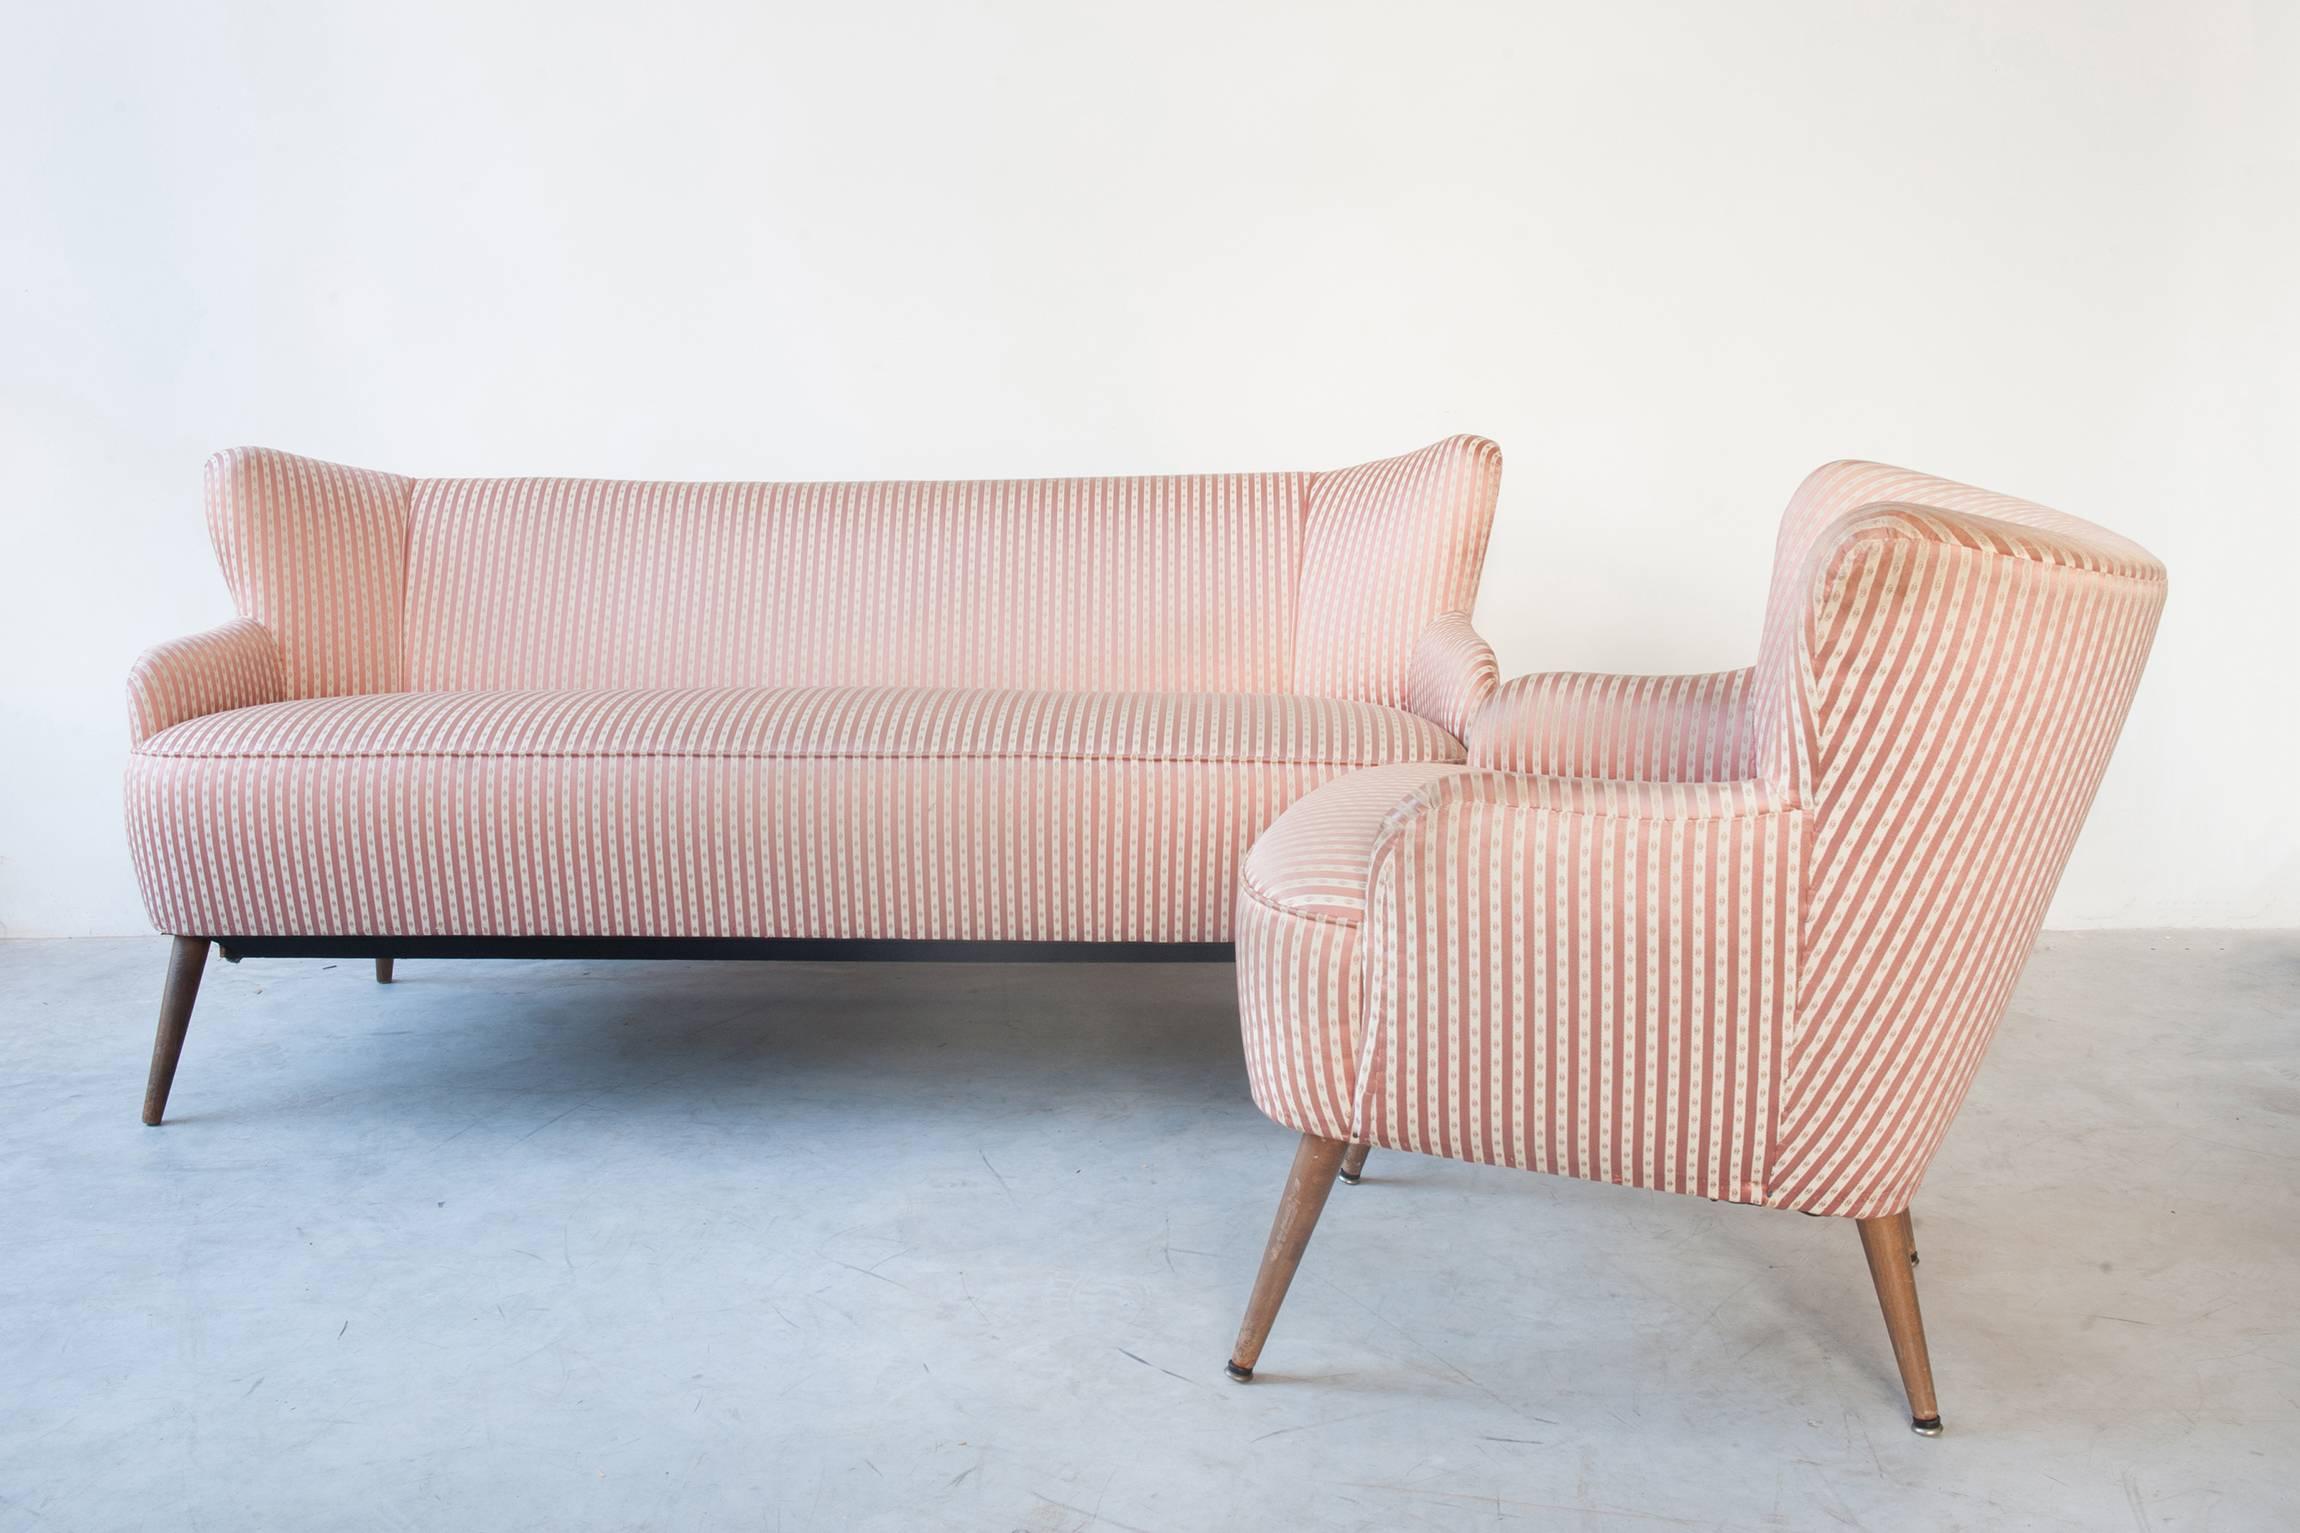 One of a kind, this beautiful authentic 1950s club cocktail chair and sofa!
Material: original English silk fabric with teak wood legs. Very special in this separate pink-pink and ecru lined decor.
Considering the age still in original very good